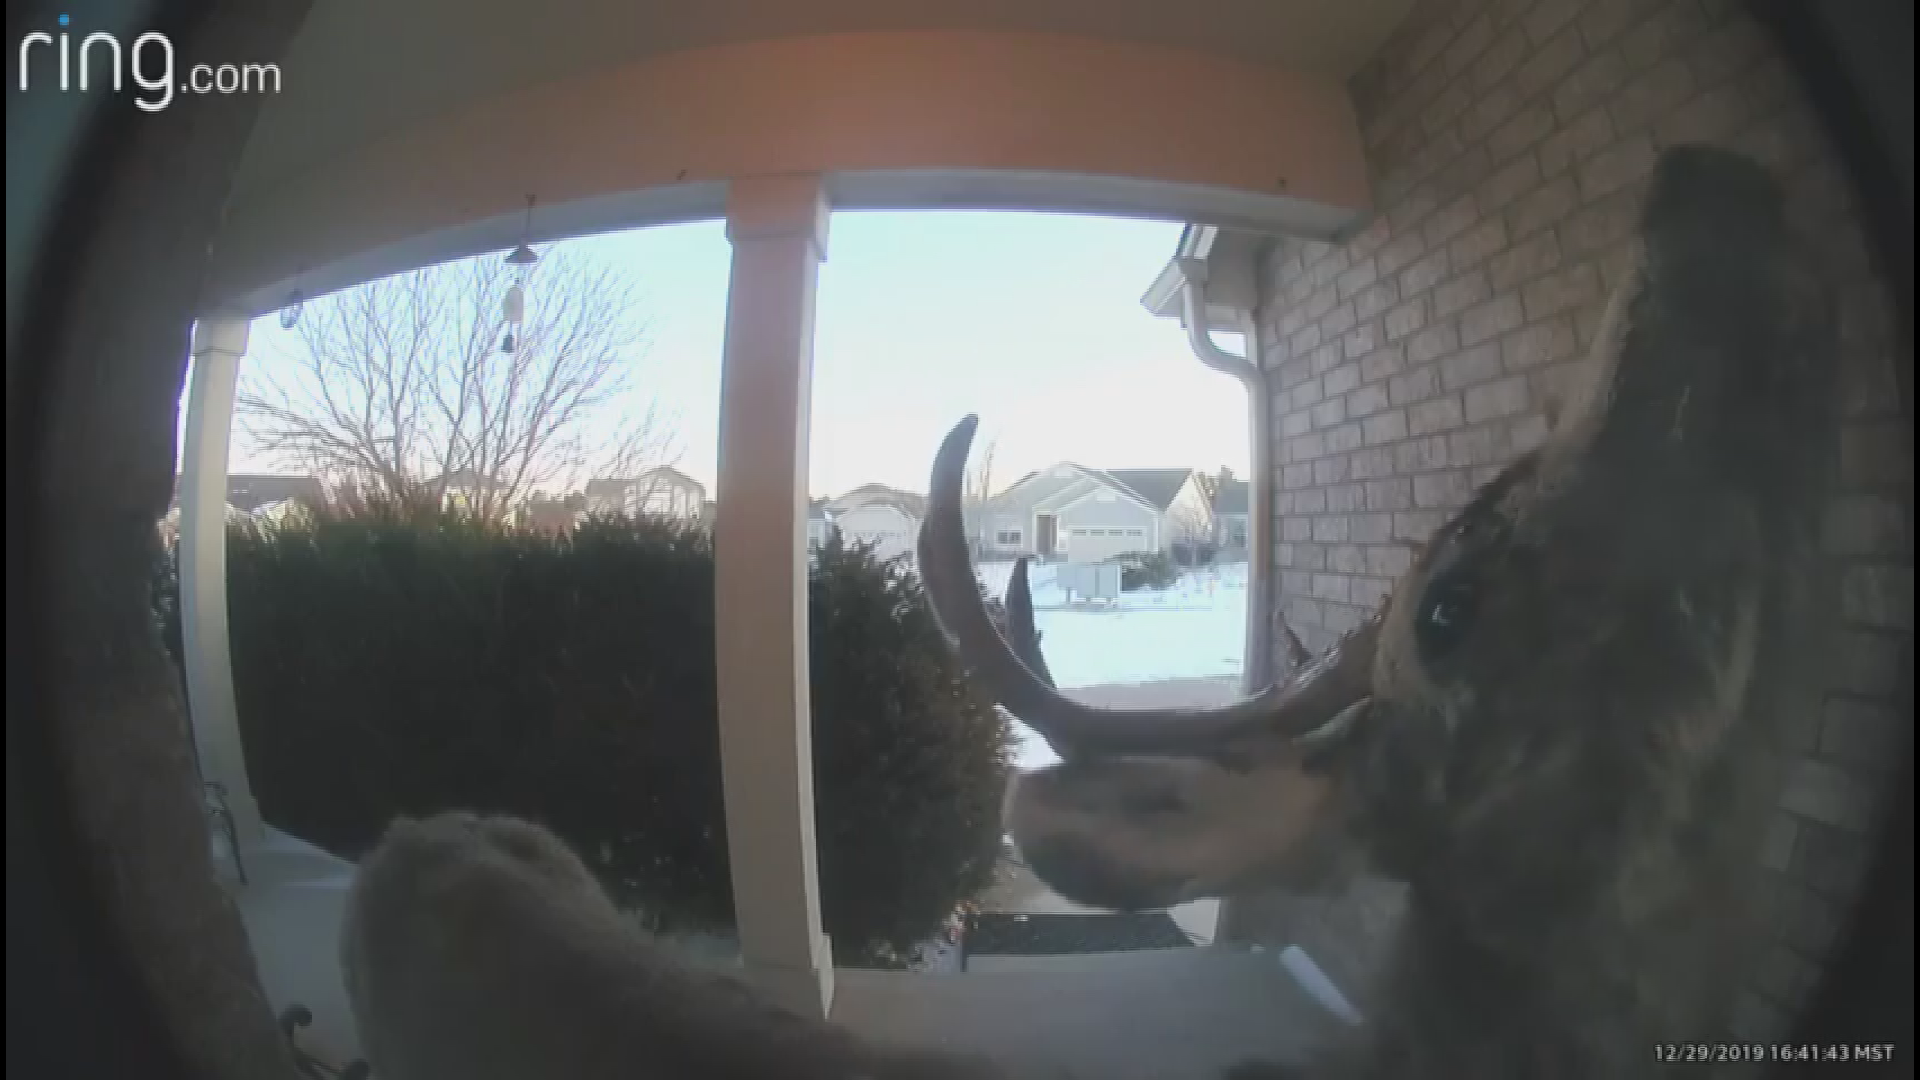 This was the 4th time in 2 weeks the brave buck stopped by, according to 9NEWS viewer Donna Manickchand Ferrin, and the doorbell cam captured everything!